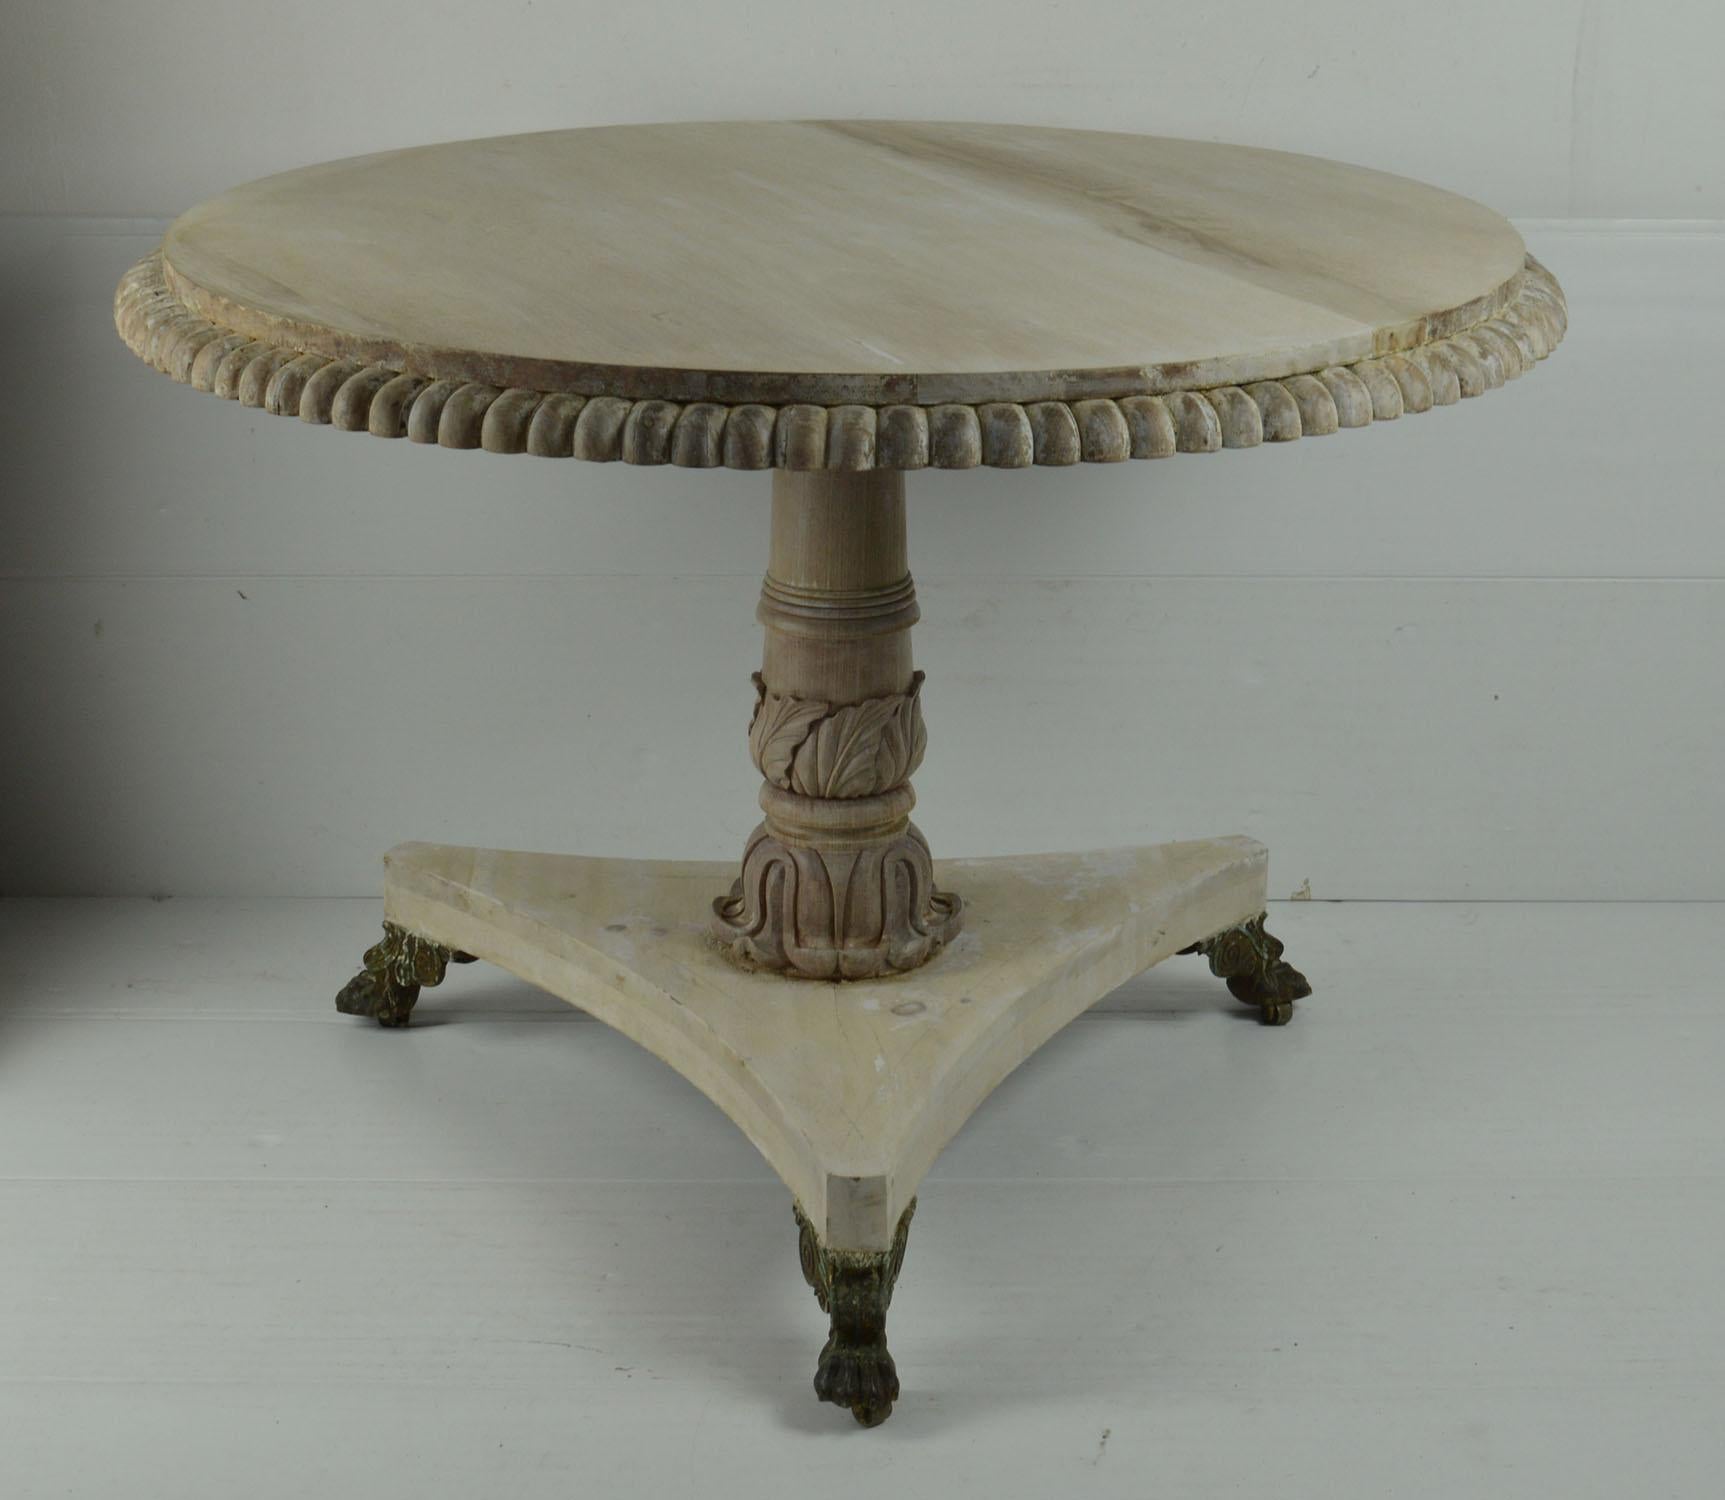 Fabulous small round table. Made from bleached Honduras mahogany and pine

I particularly like the exaggerated gadrooning to the top edge and the fabulous gilt metal feet.

Beautifully figured top. 

On the original brass castors. 

I have